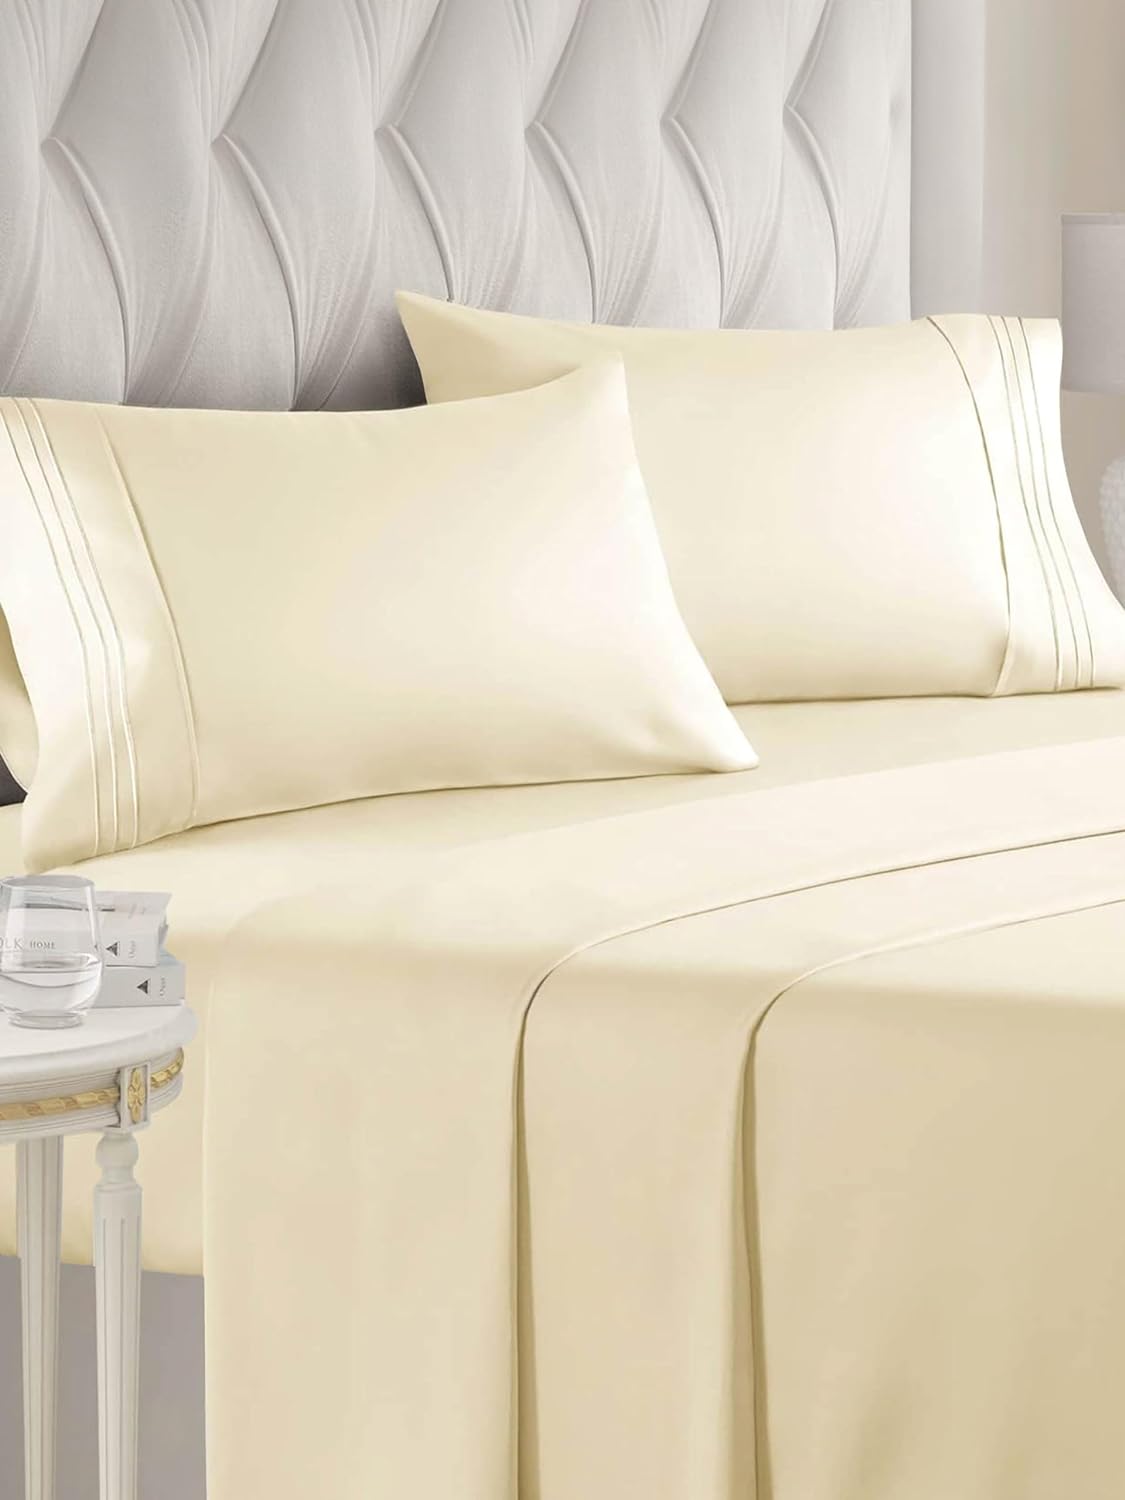 Comfy Breathable And Cooling Sheets